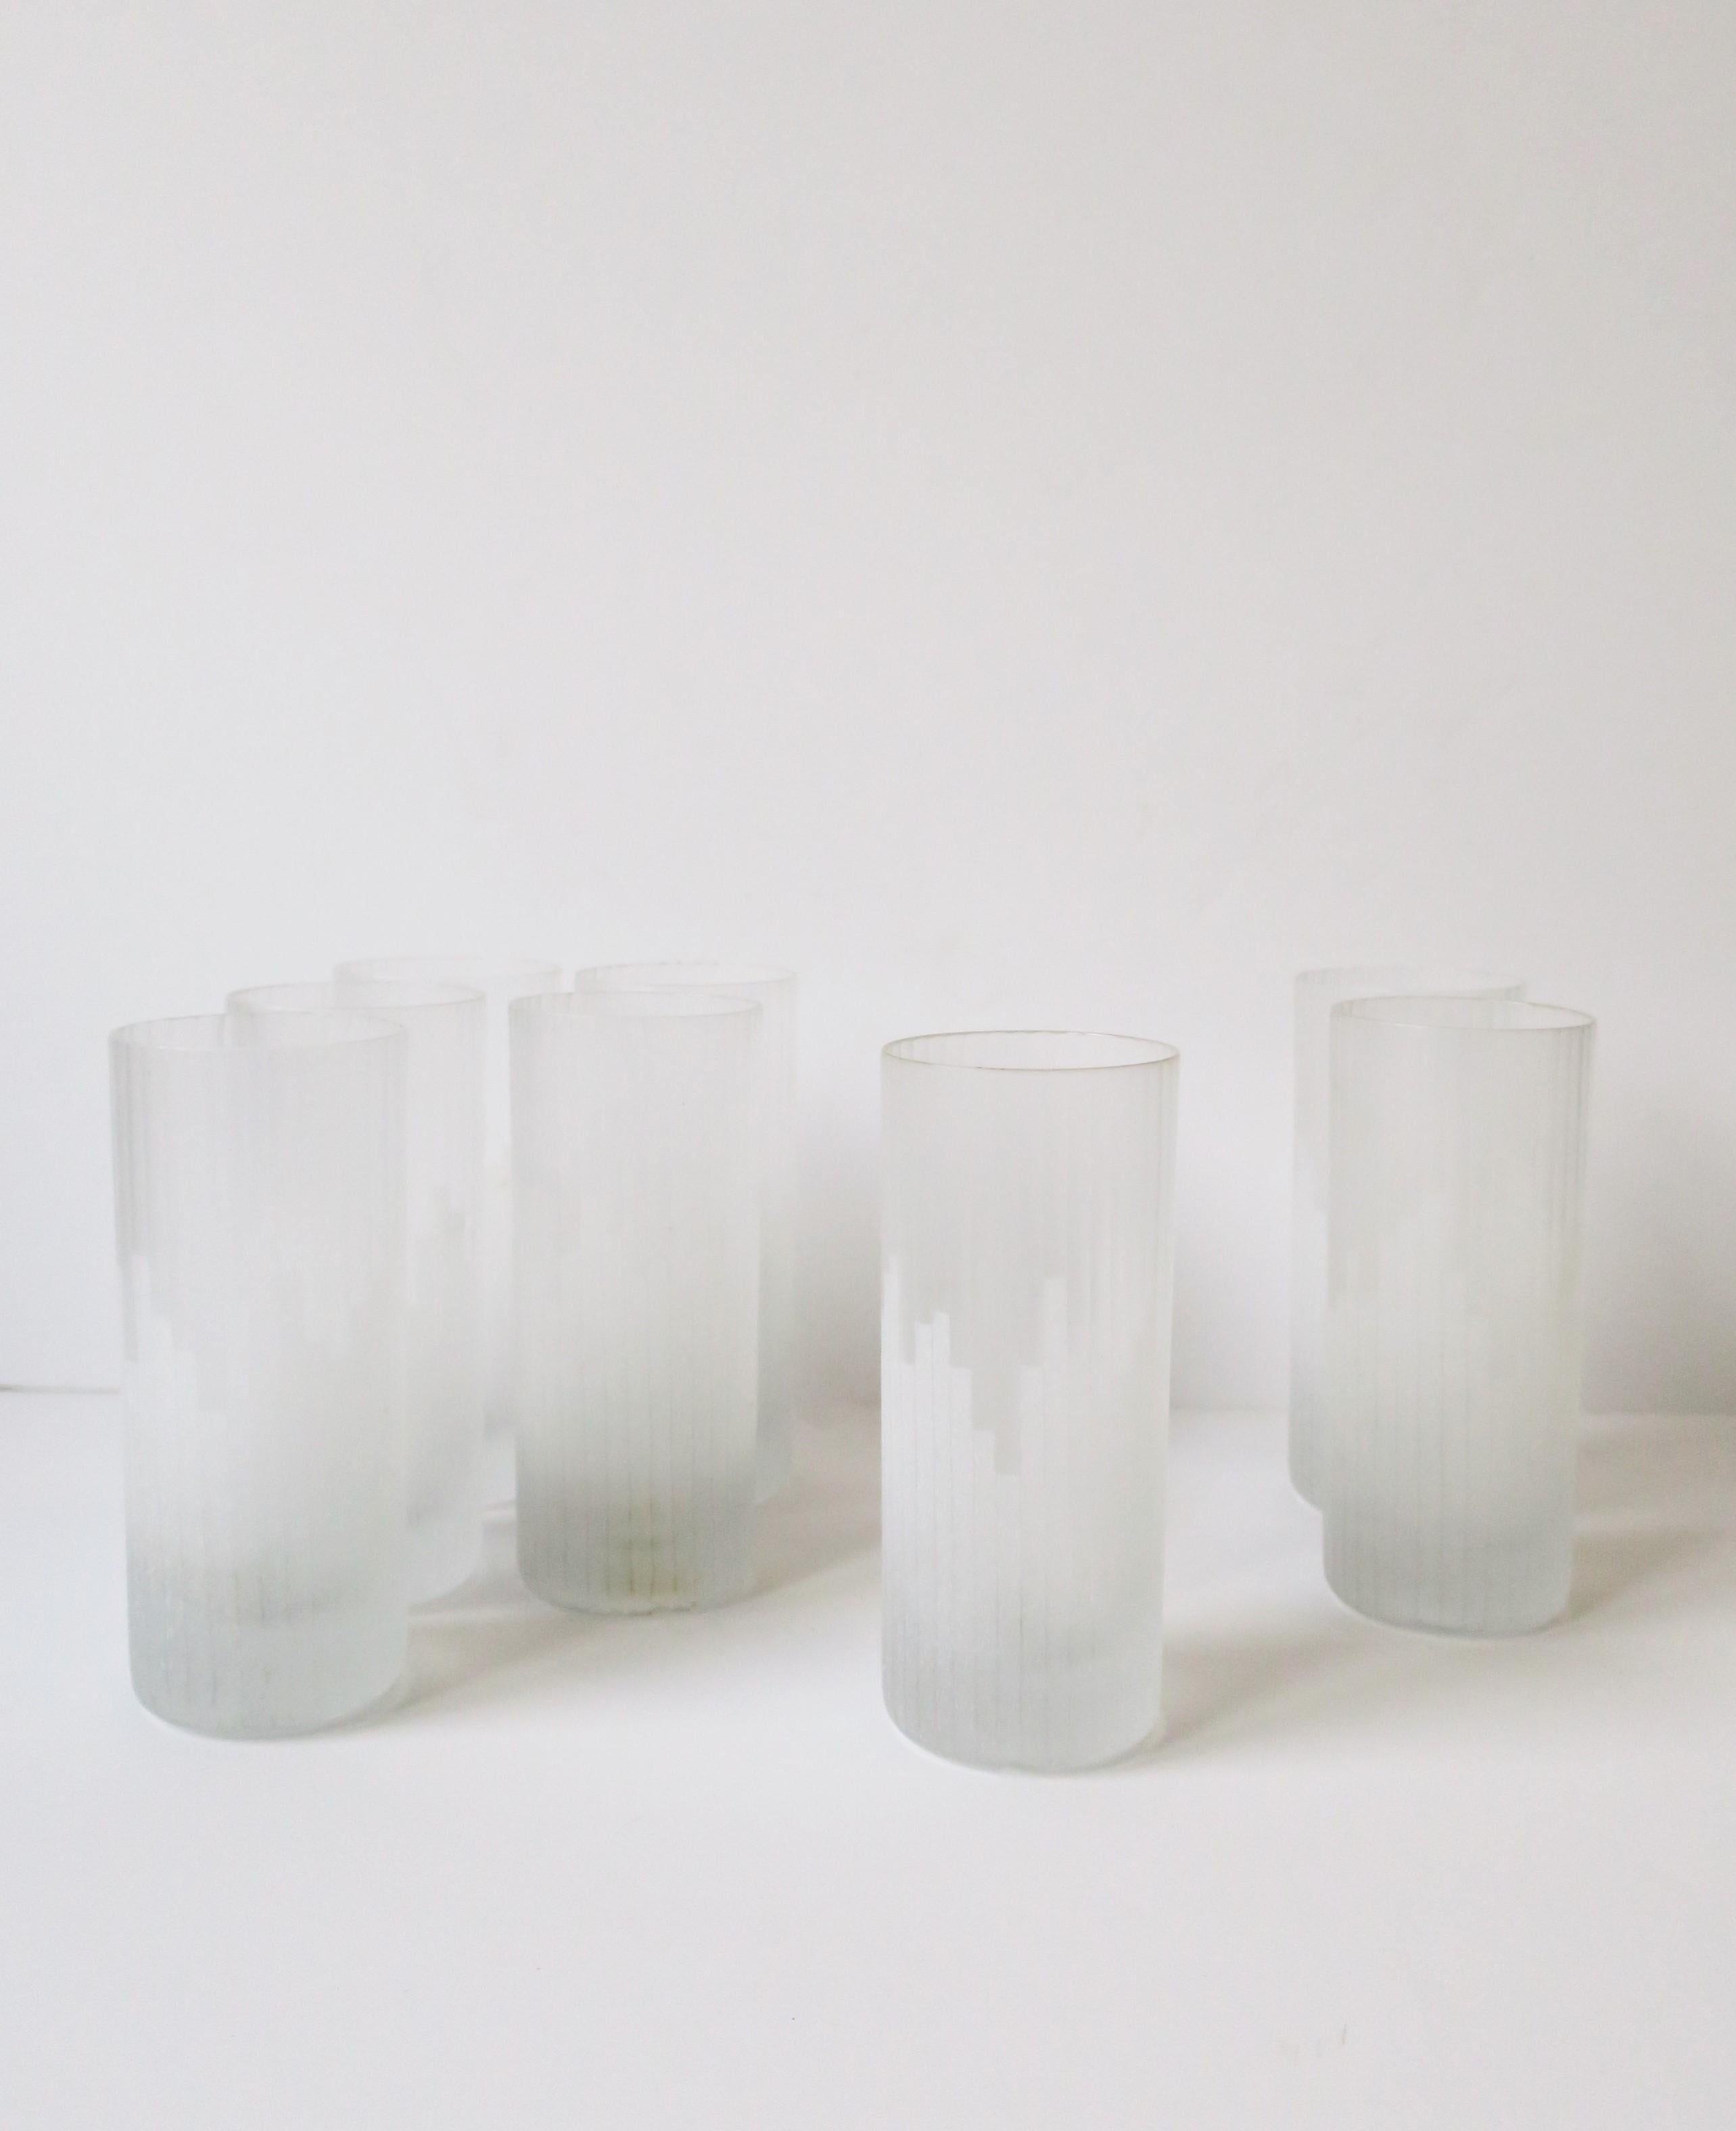 A very beautiful and rare set of eight (8) '70s Modern highball cocktail glasses by Carl Rotter Lubeck, circa 1970s, late-20th century, West Germany. Glasses have a Modern/Art Deco cityscape design on a matte glass with fluted design. A great set